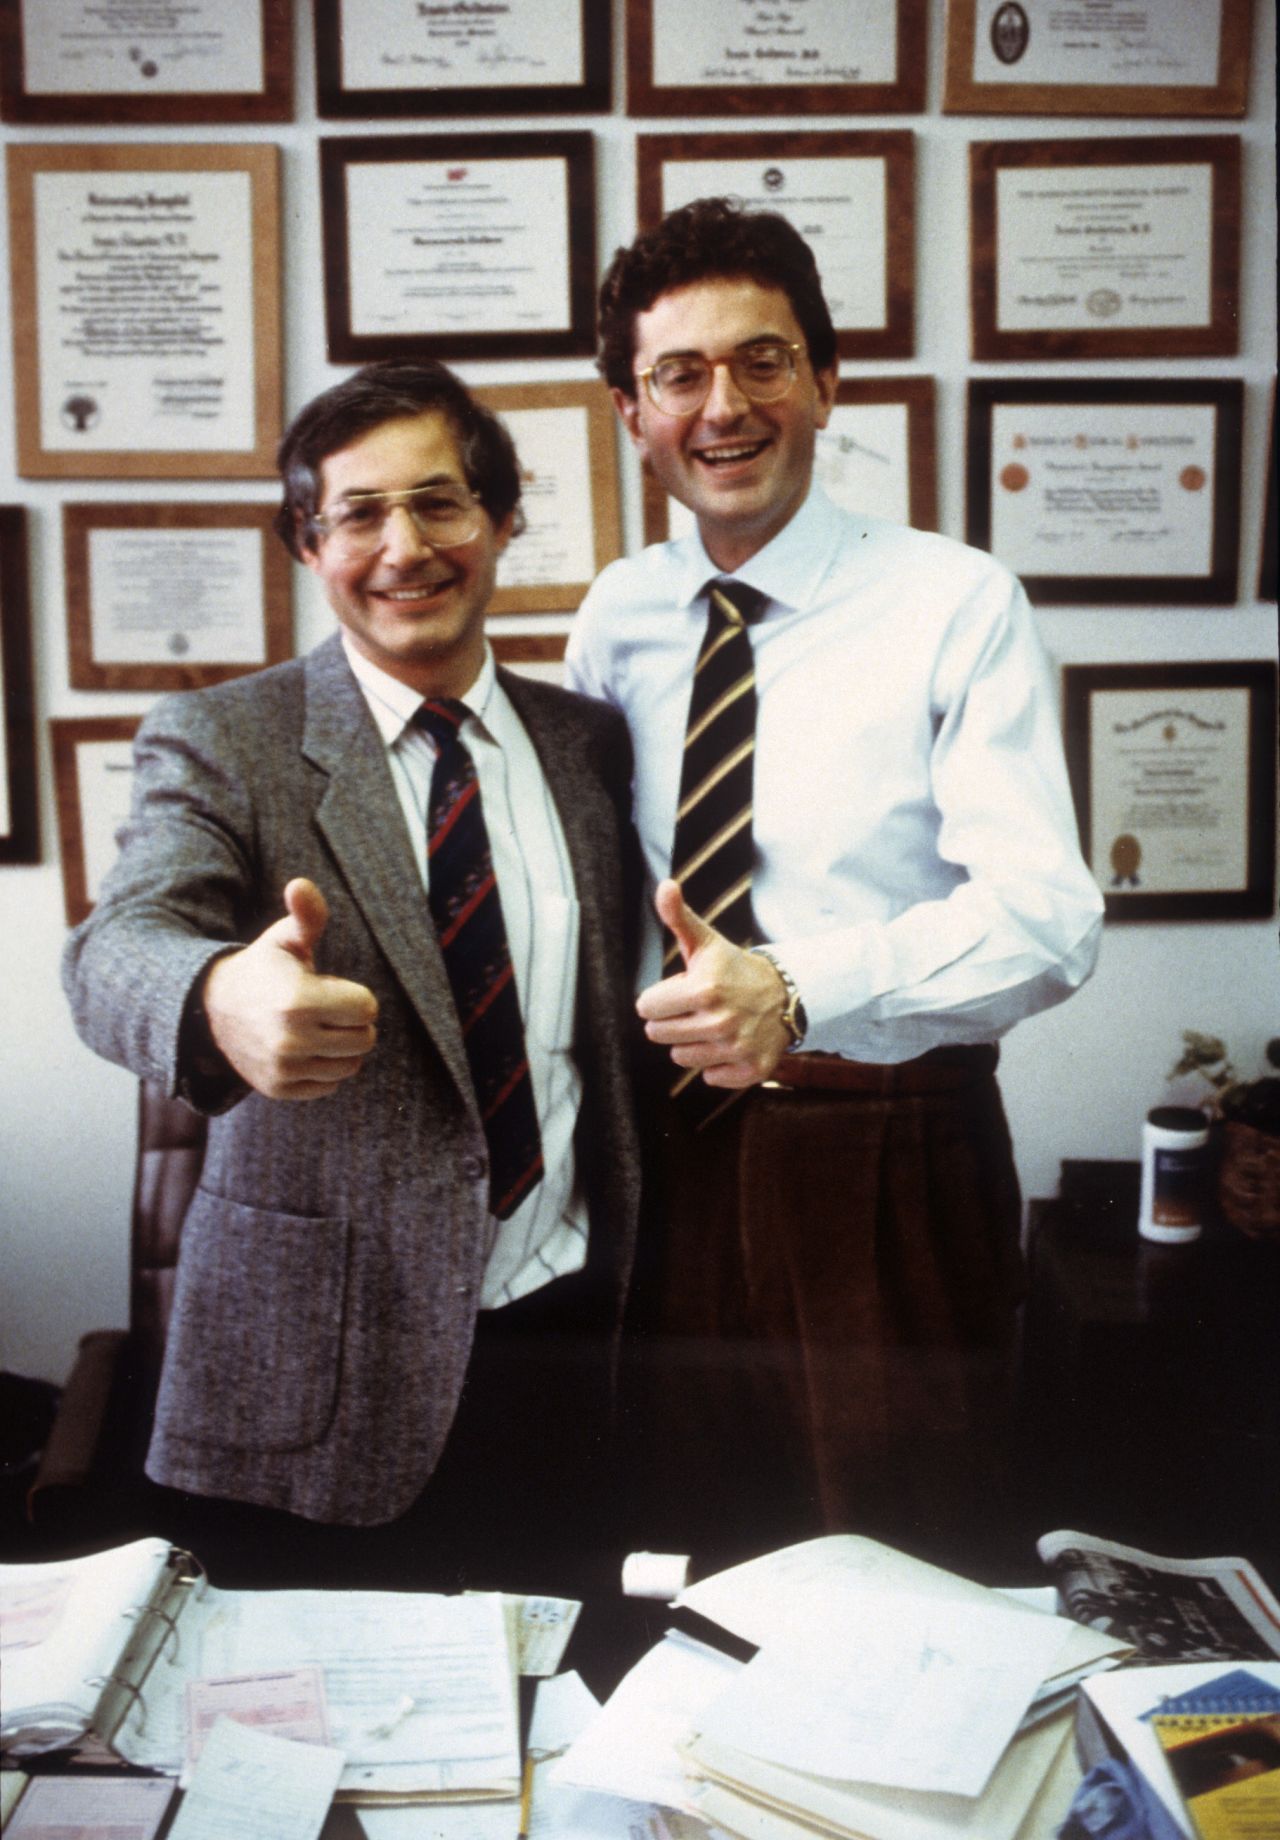 Goldstein, left, and Dr. Francesco Montorsi in the 1980s. Goldstein currently edits the <a href="http://onlinelibrary.wiley.com/journal/10.1111/(ISSN)1743-6109/issues" target="_blank" target="_blank">Journal of Sexual Medicine</a>, and Montorsi, an Italian urologist, edits the journal <a href="http://www.europeanurology.com/" target="_blank" target="_blank">European Urology</a>.